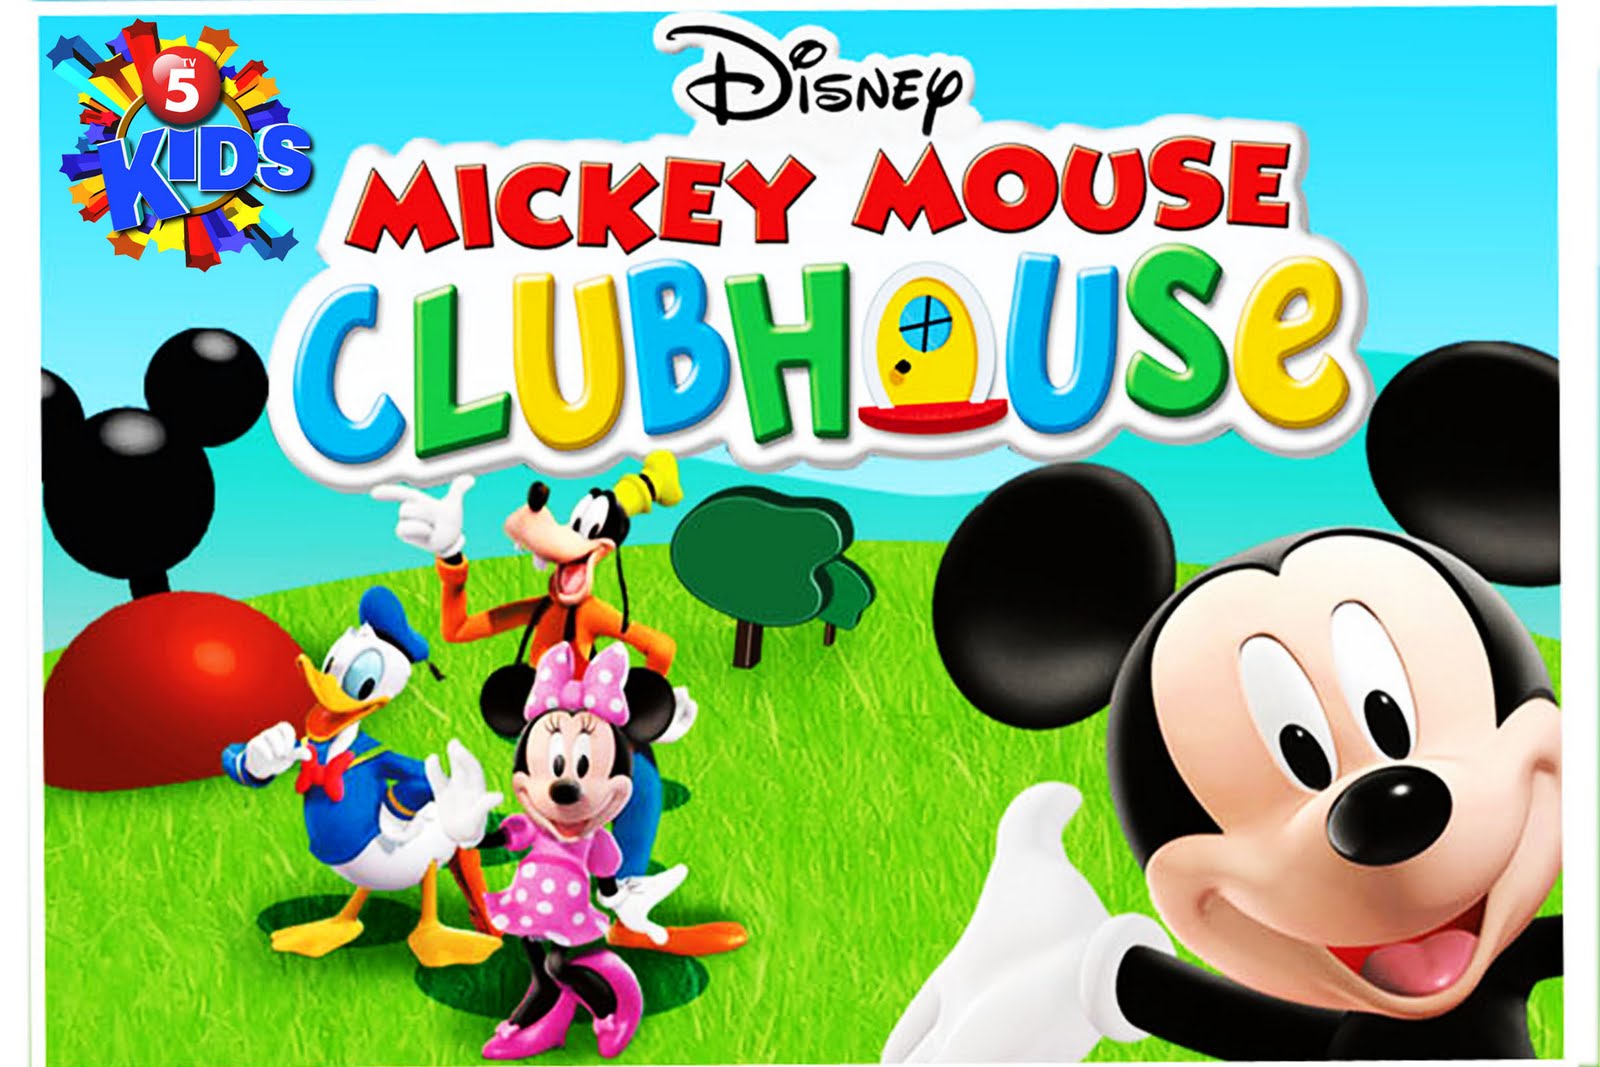 caylee anthony TV5 Kids Airs Mickey Mouse Clubhouse  